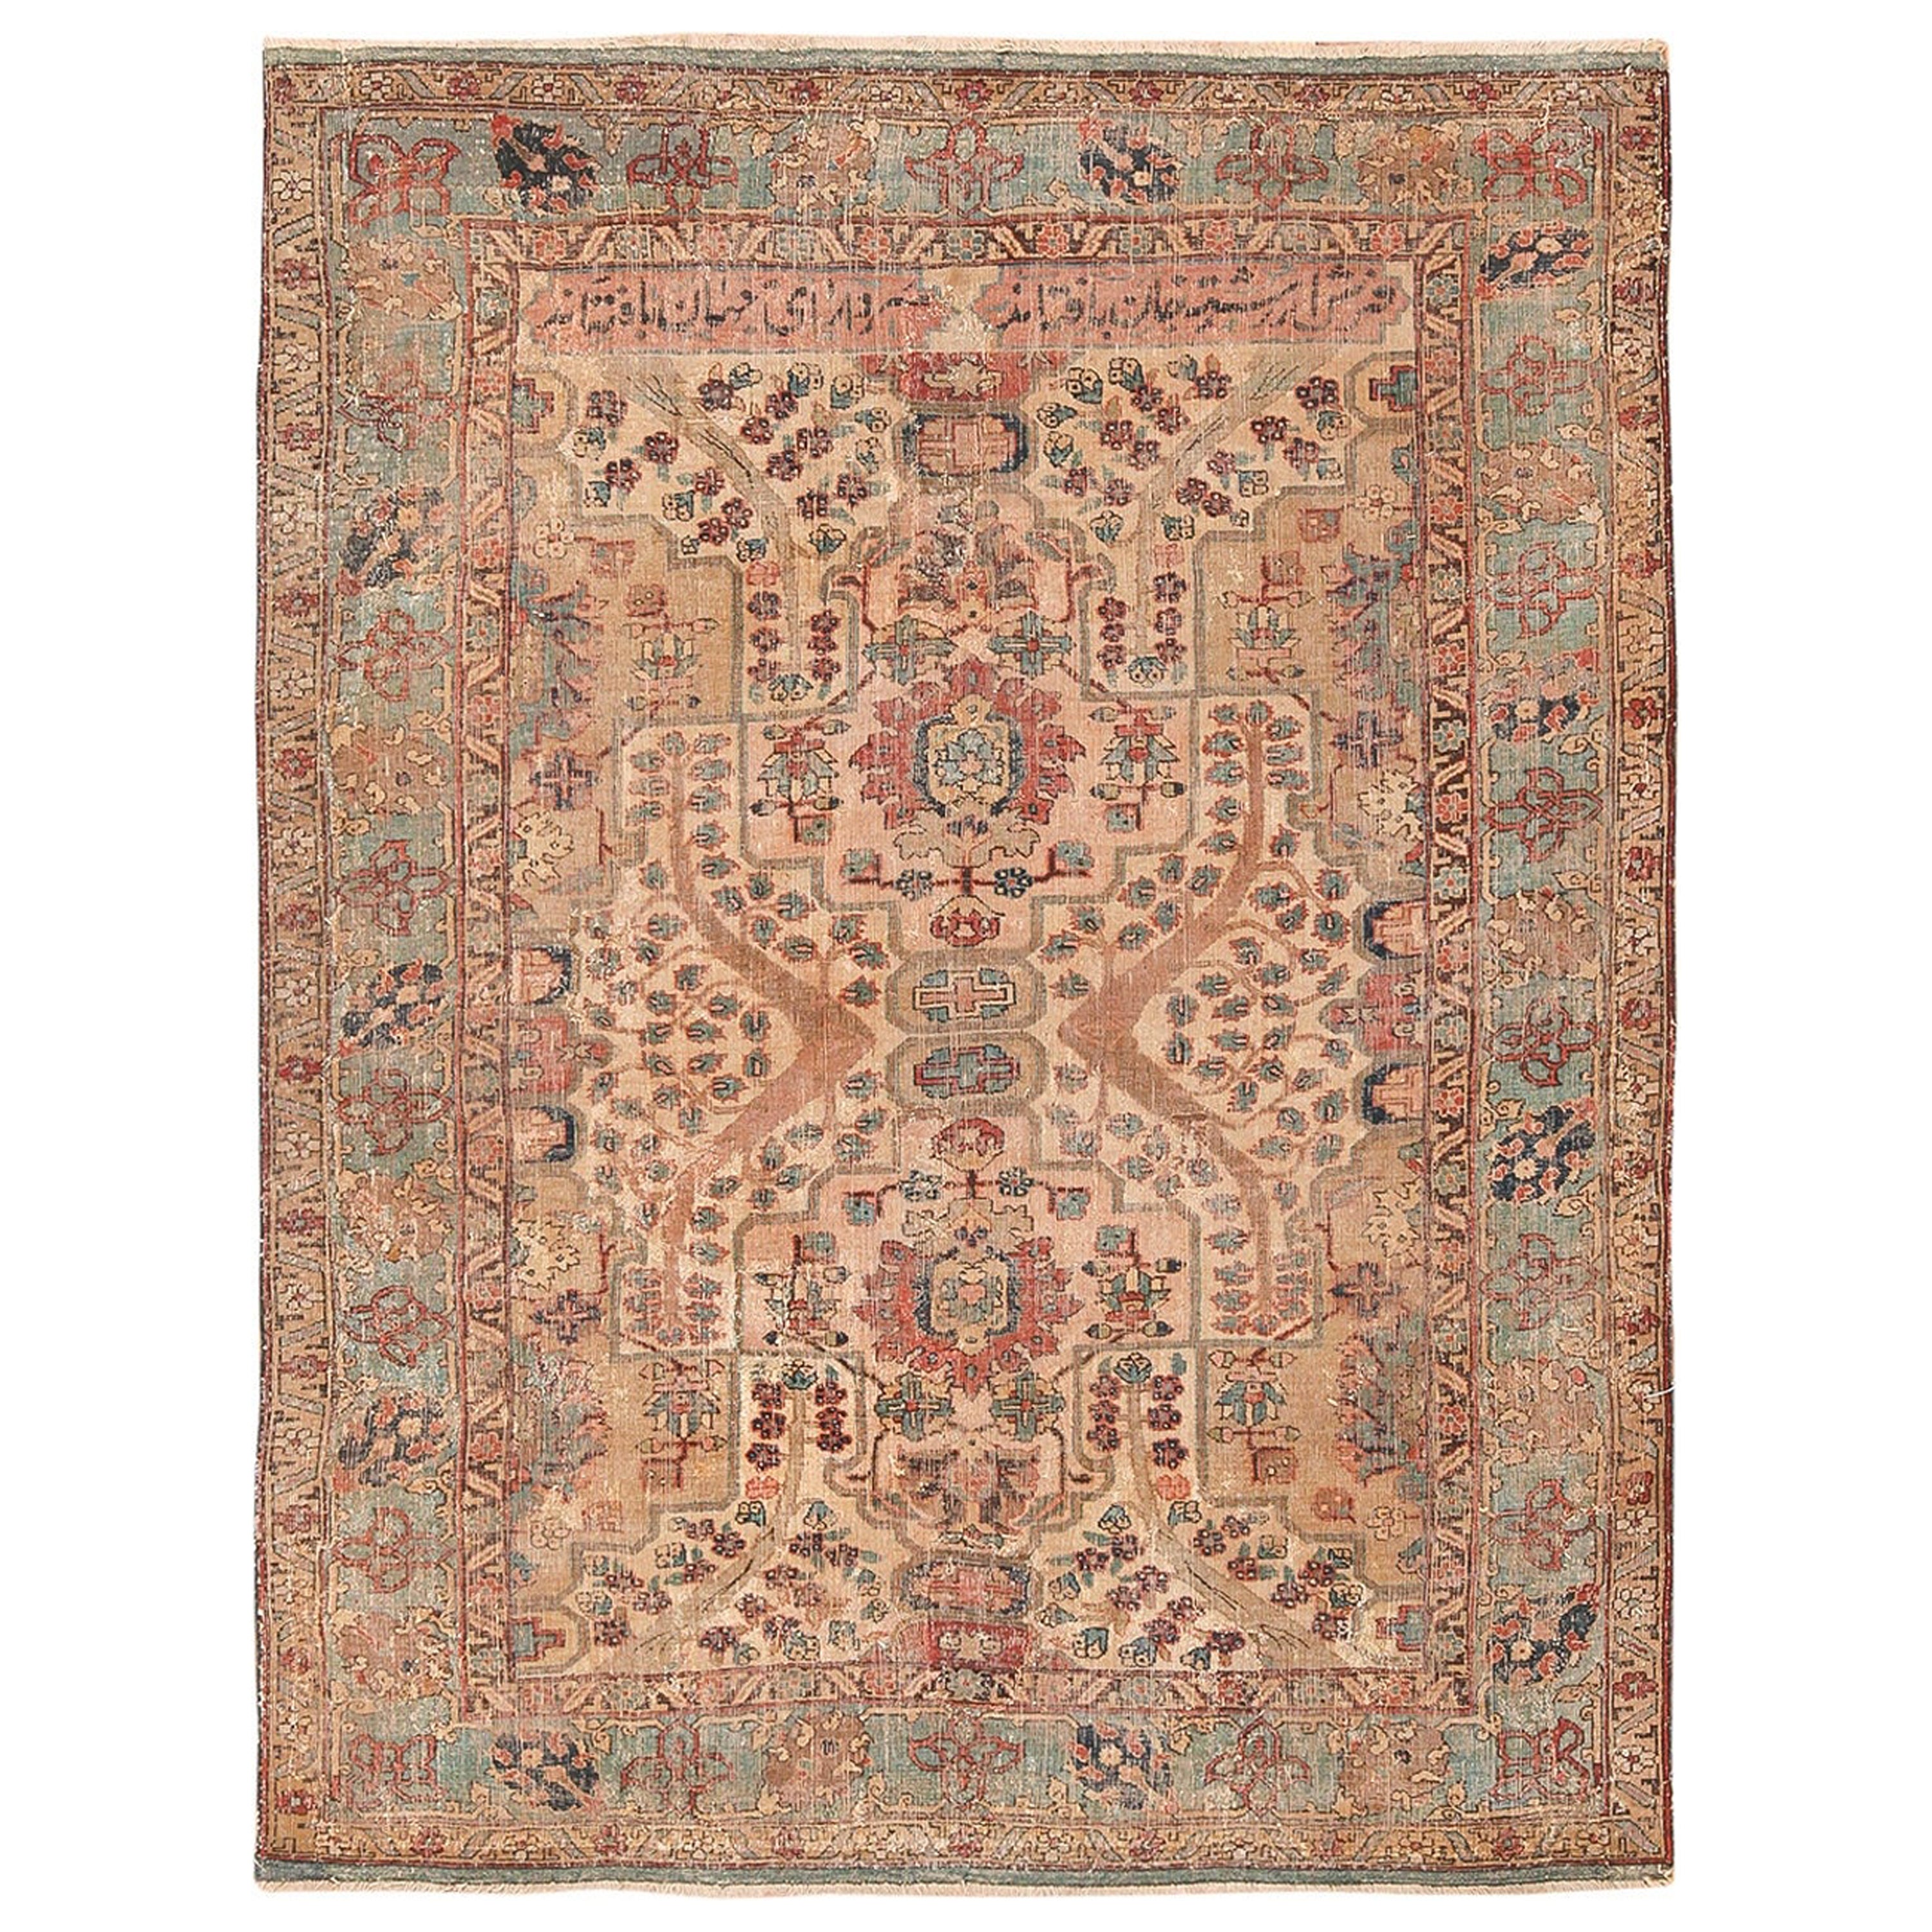 Nazmiyal 17th Century Small Size Persian Khorassan Rug. 4 ft 5 in x 5 ft 9 in